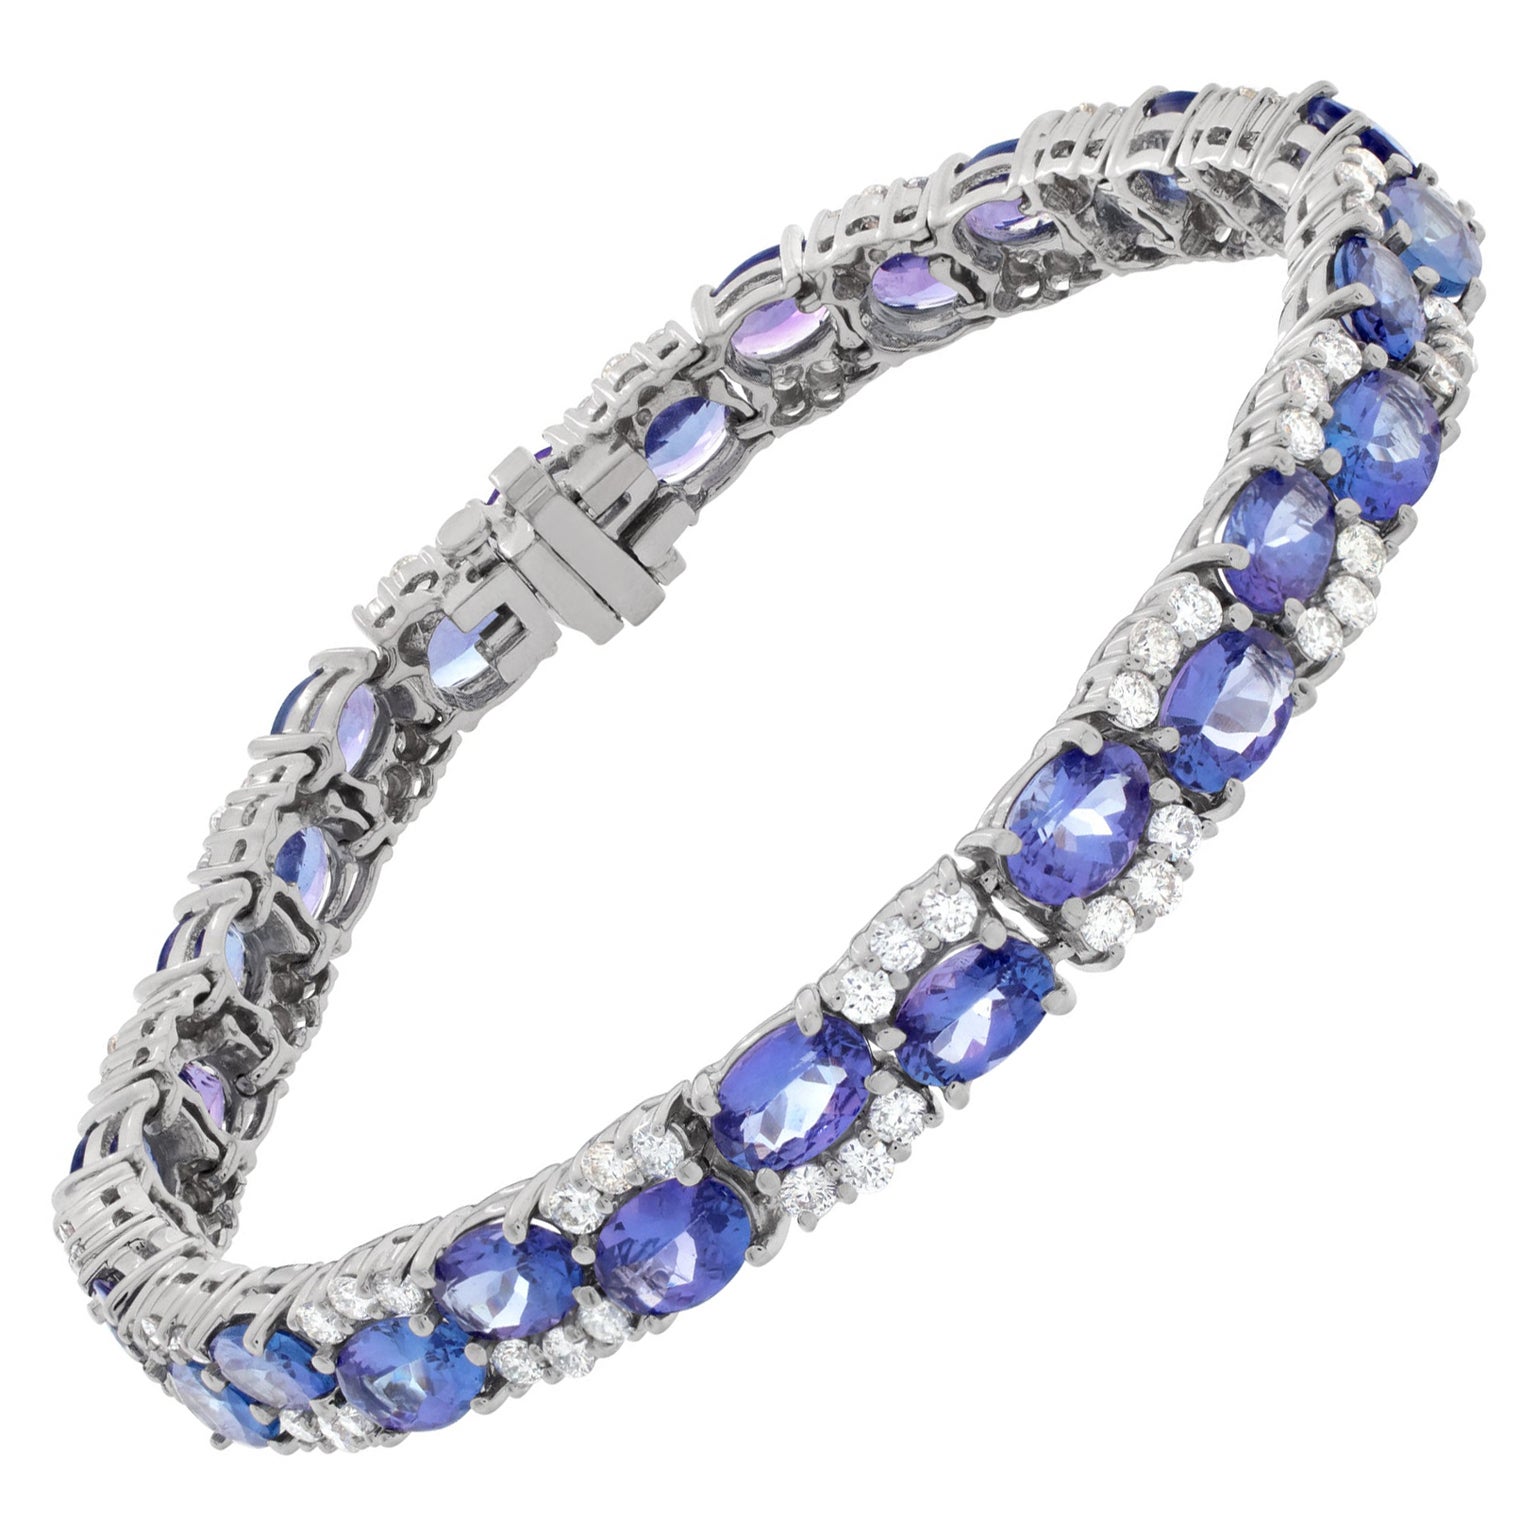 Line Bracelet in 14k White Gold with 2.45 Carats in Diamonds and 14.75 Carats